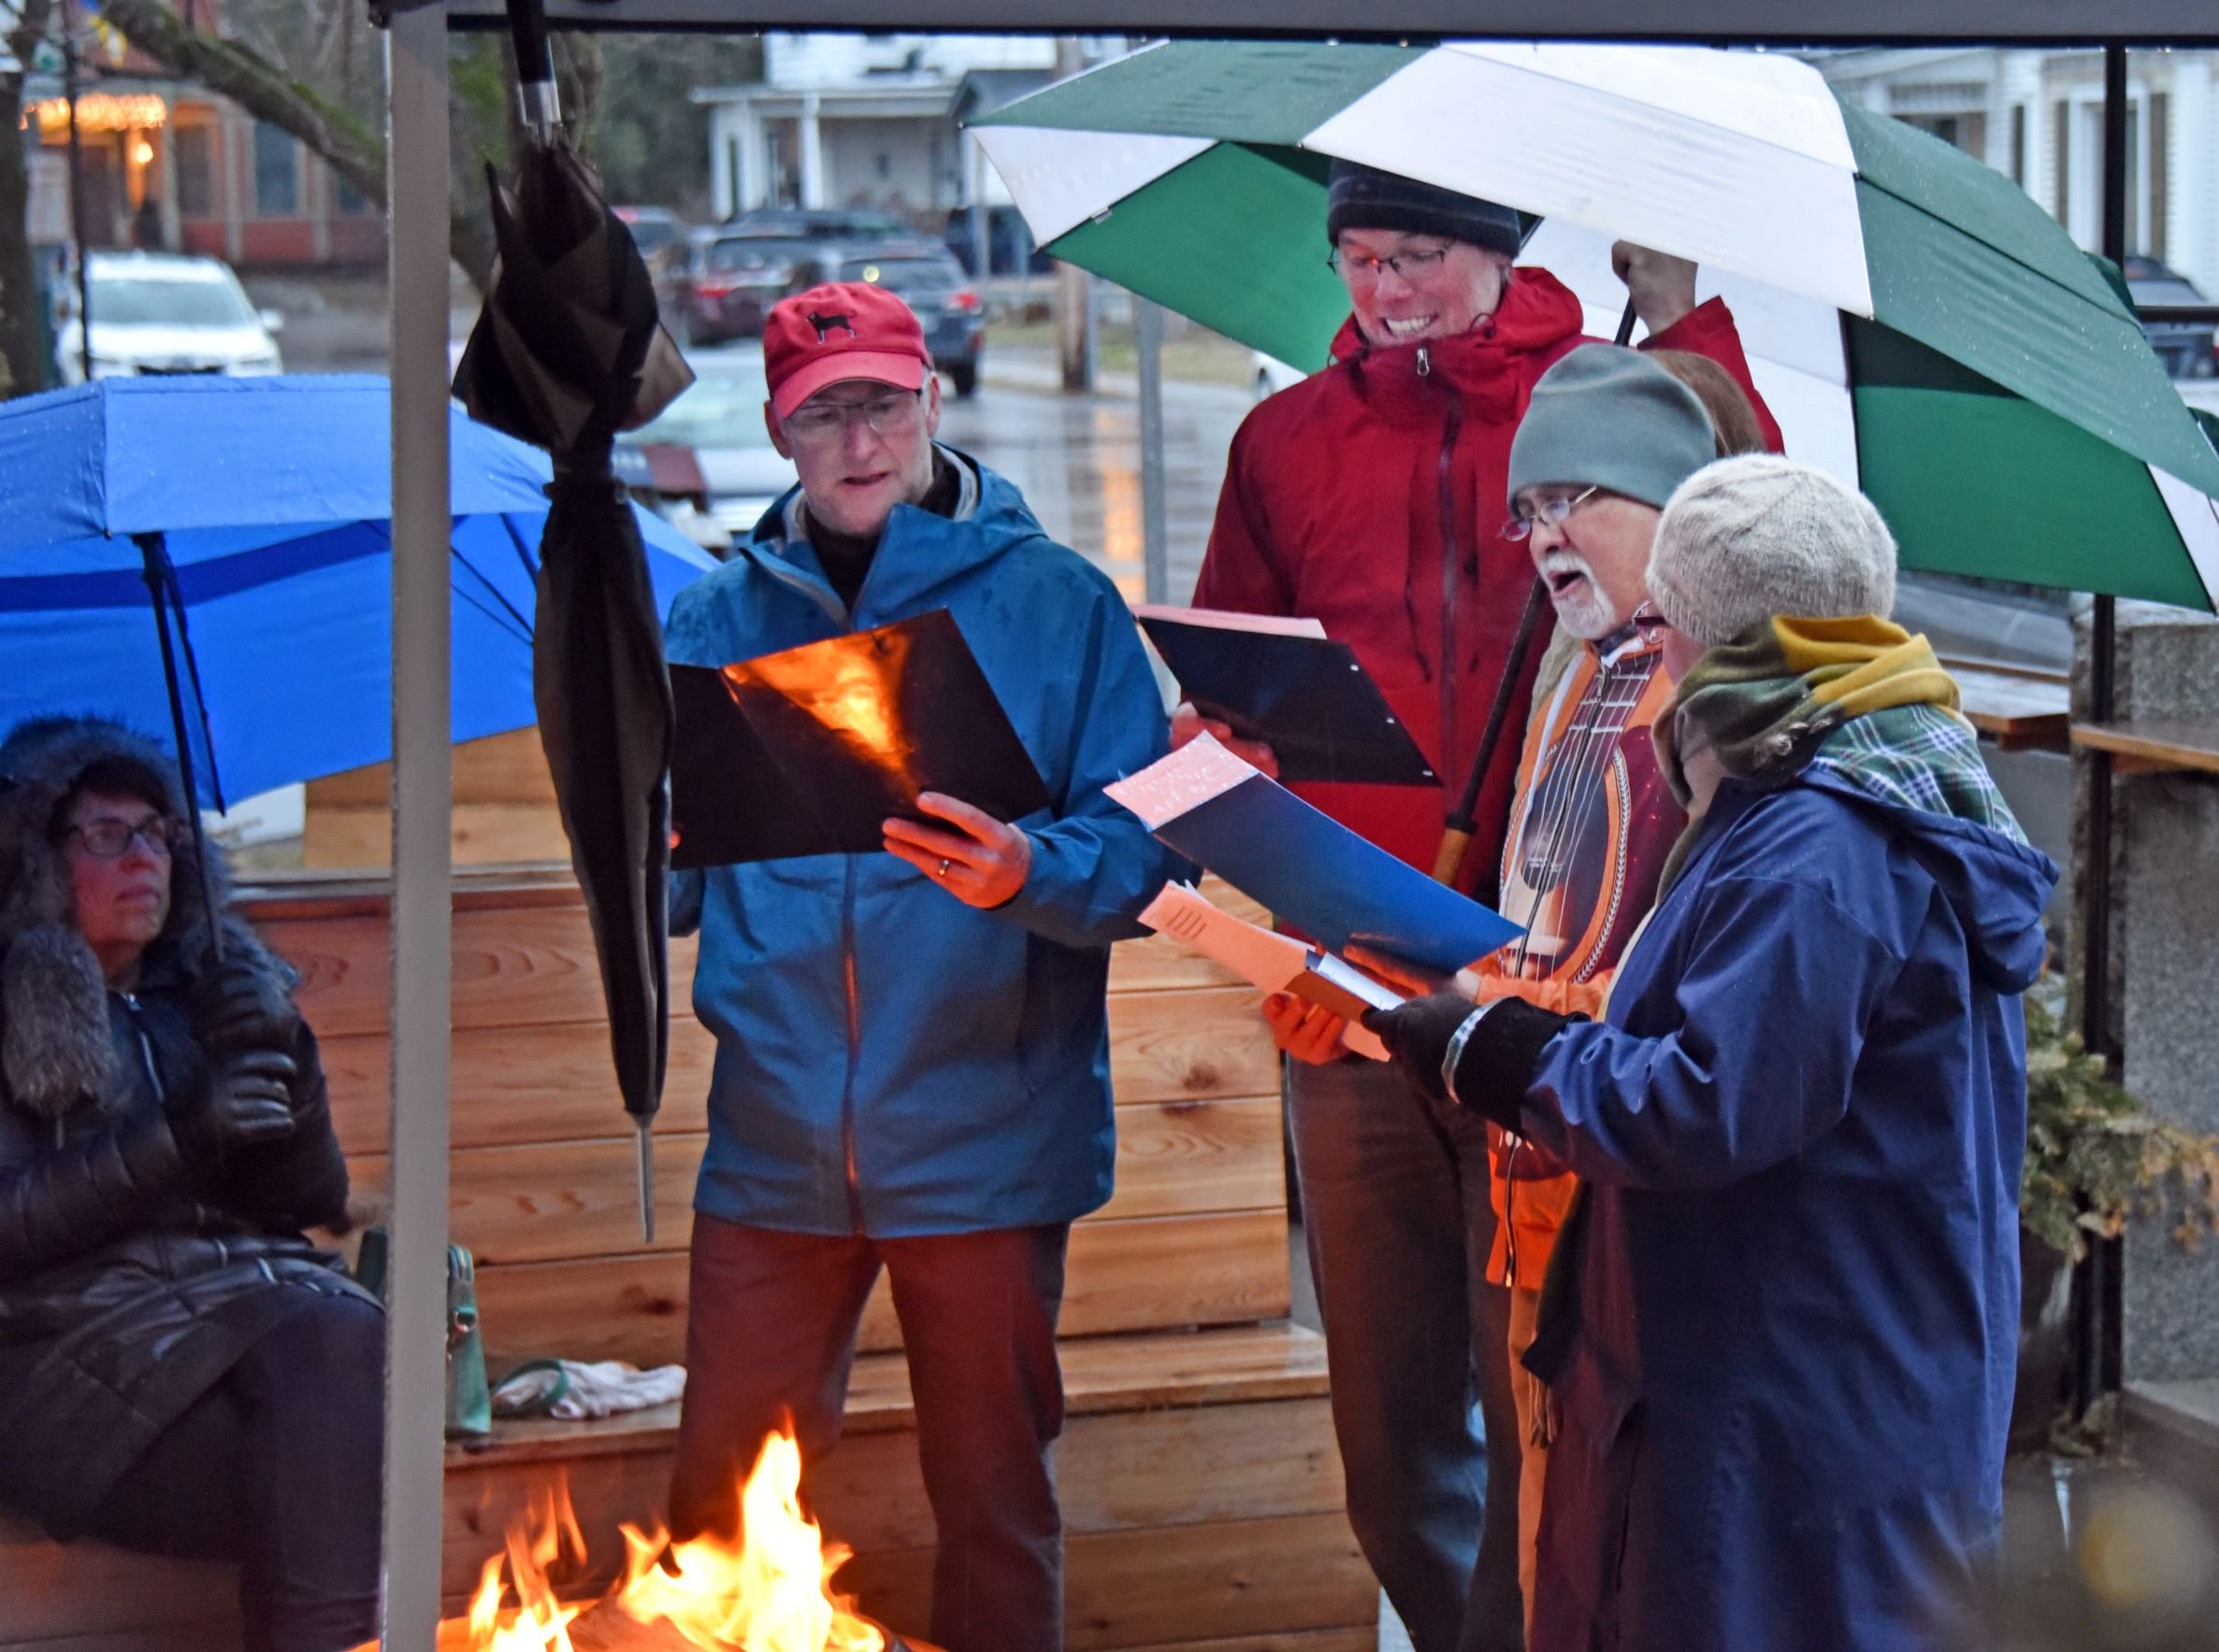  Cold and damp didn’t deter the die-hards and Pro Pig lit some sidewalk fires. Photo by Gordon Miller 